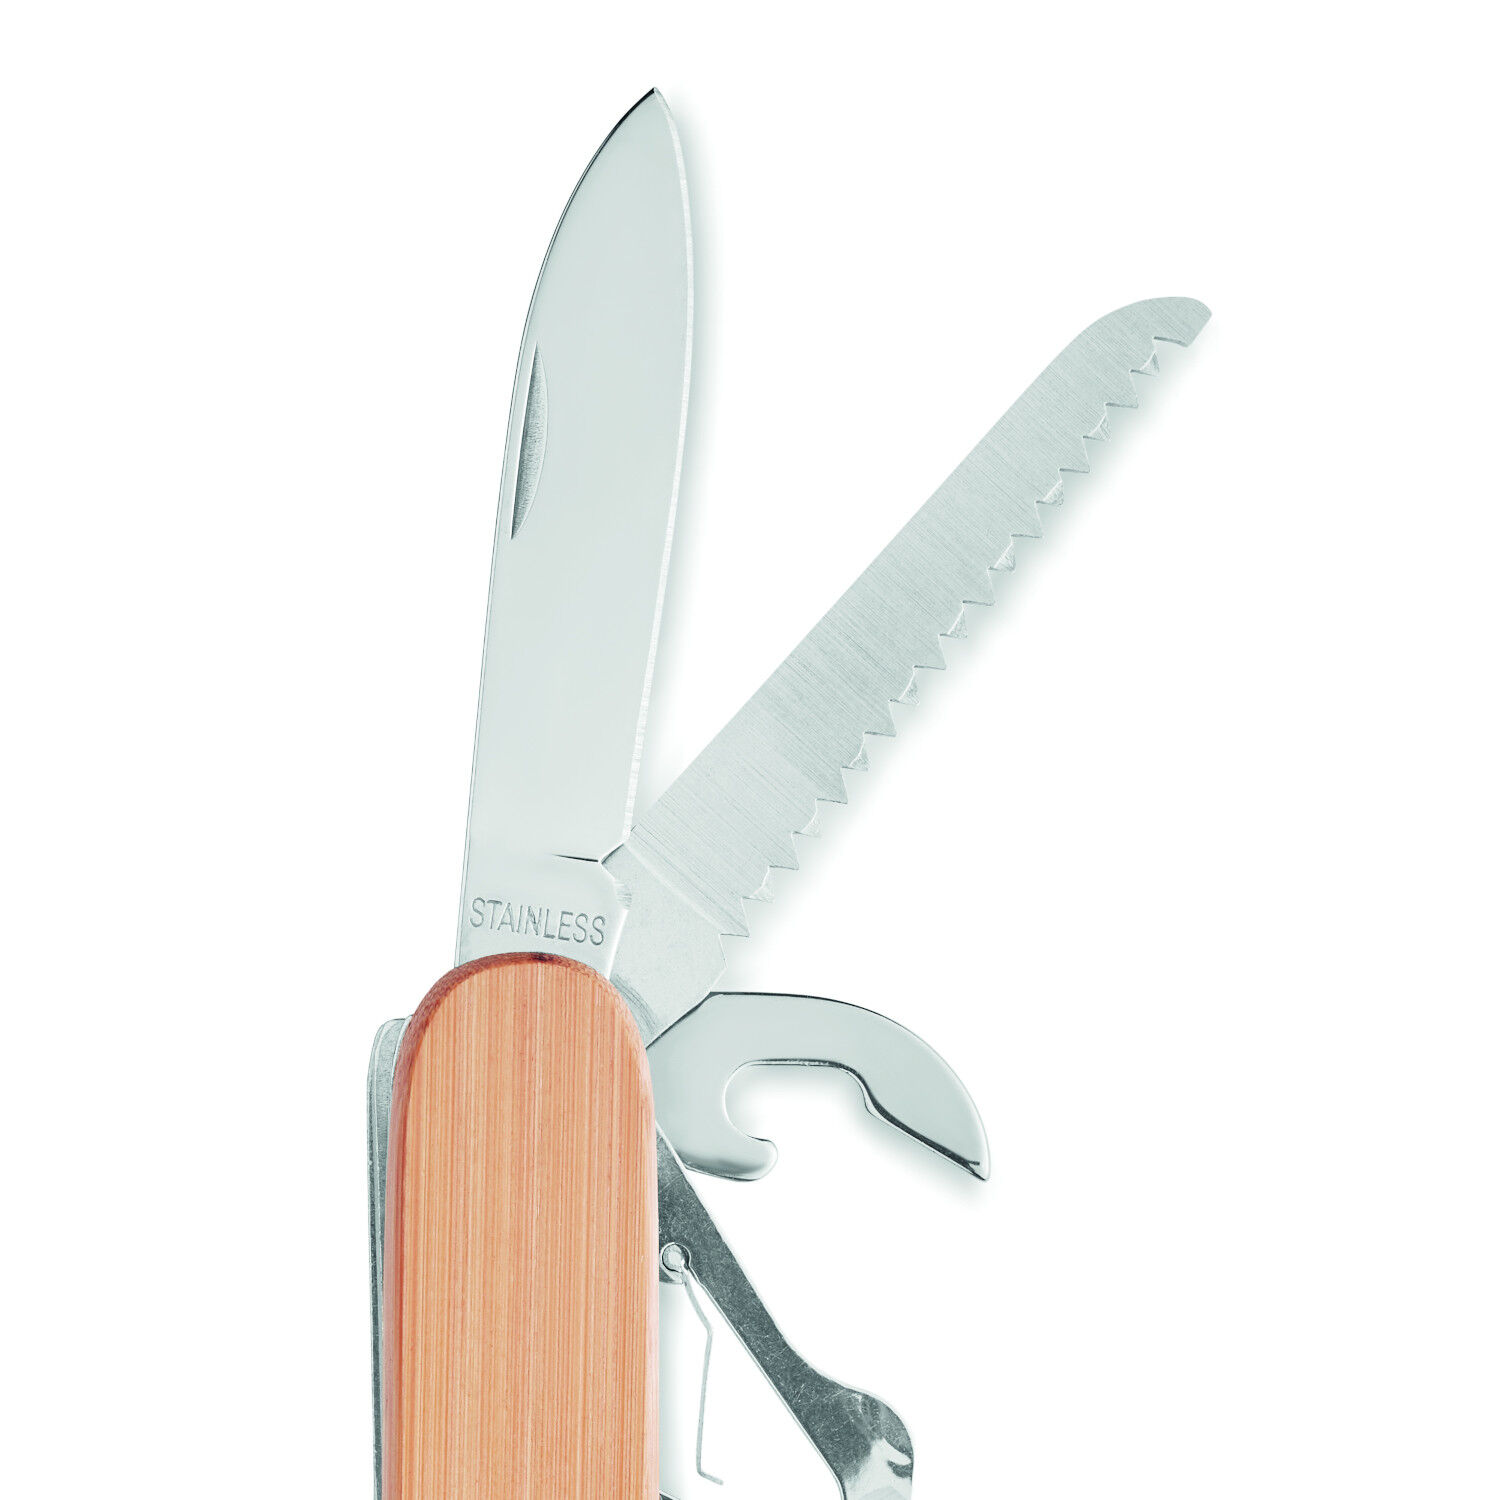 Multifunction Pocket Knife in Bamboo